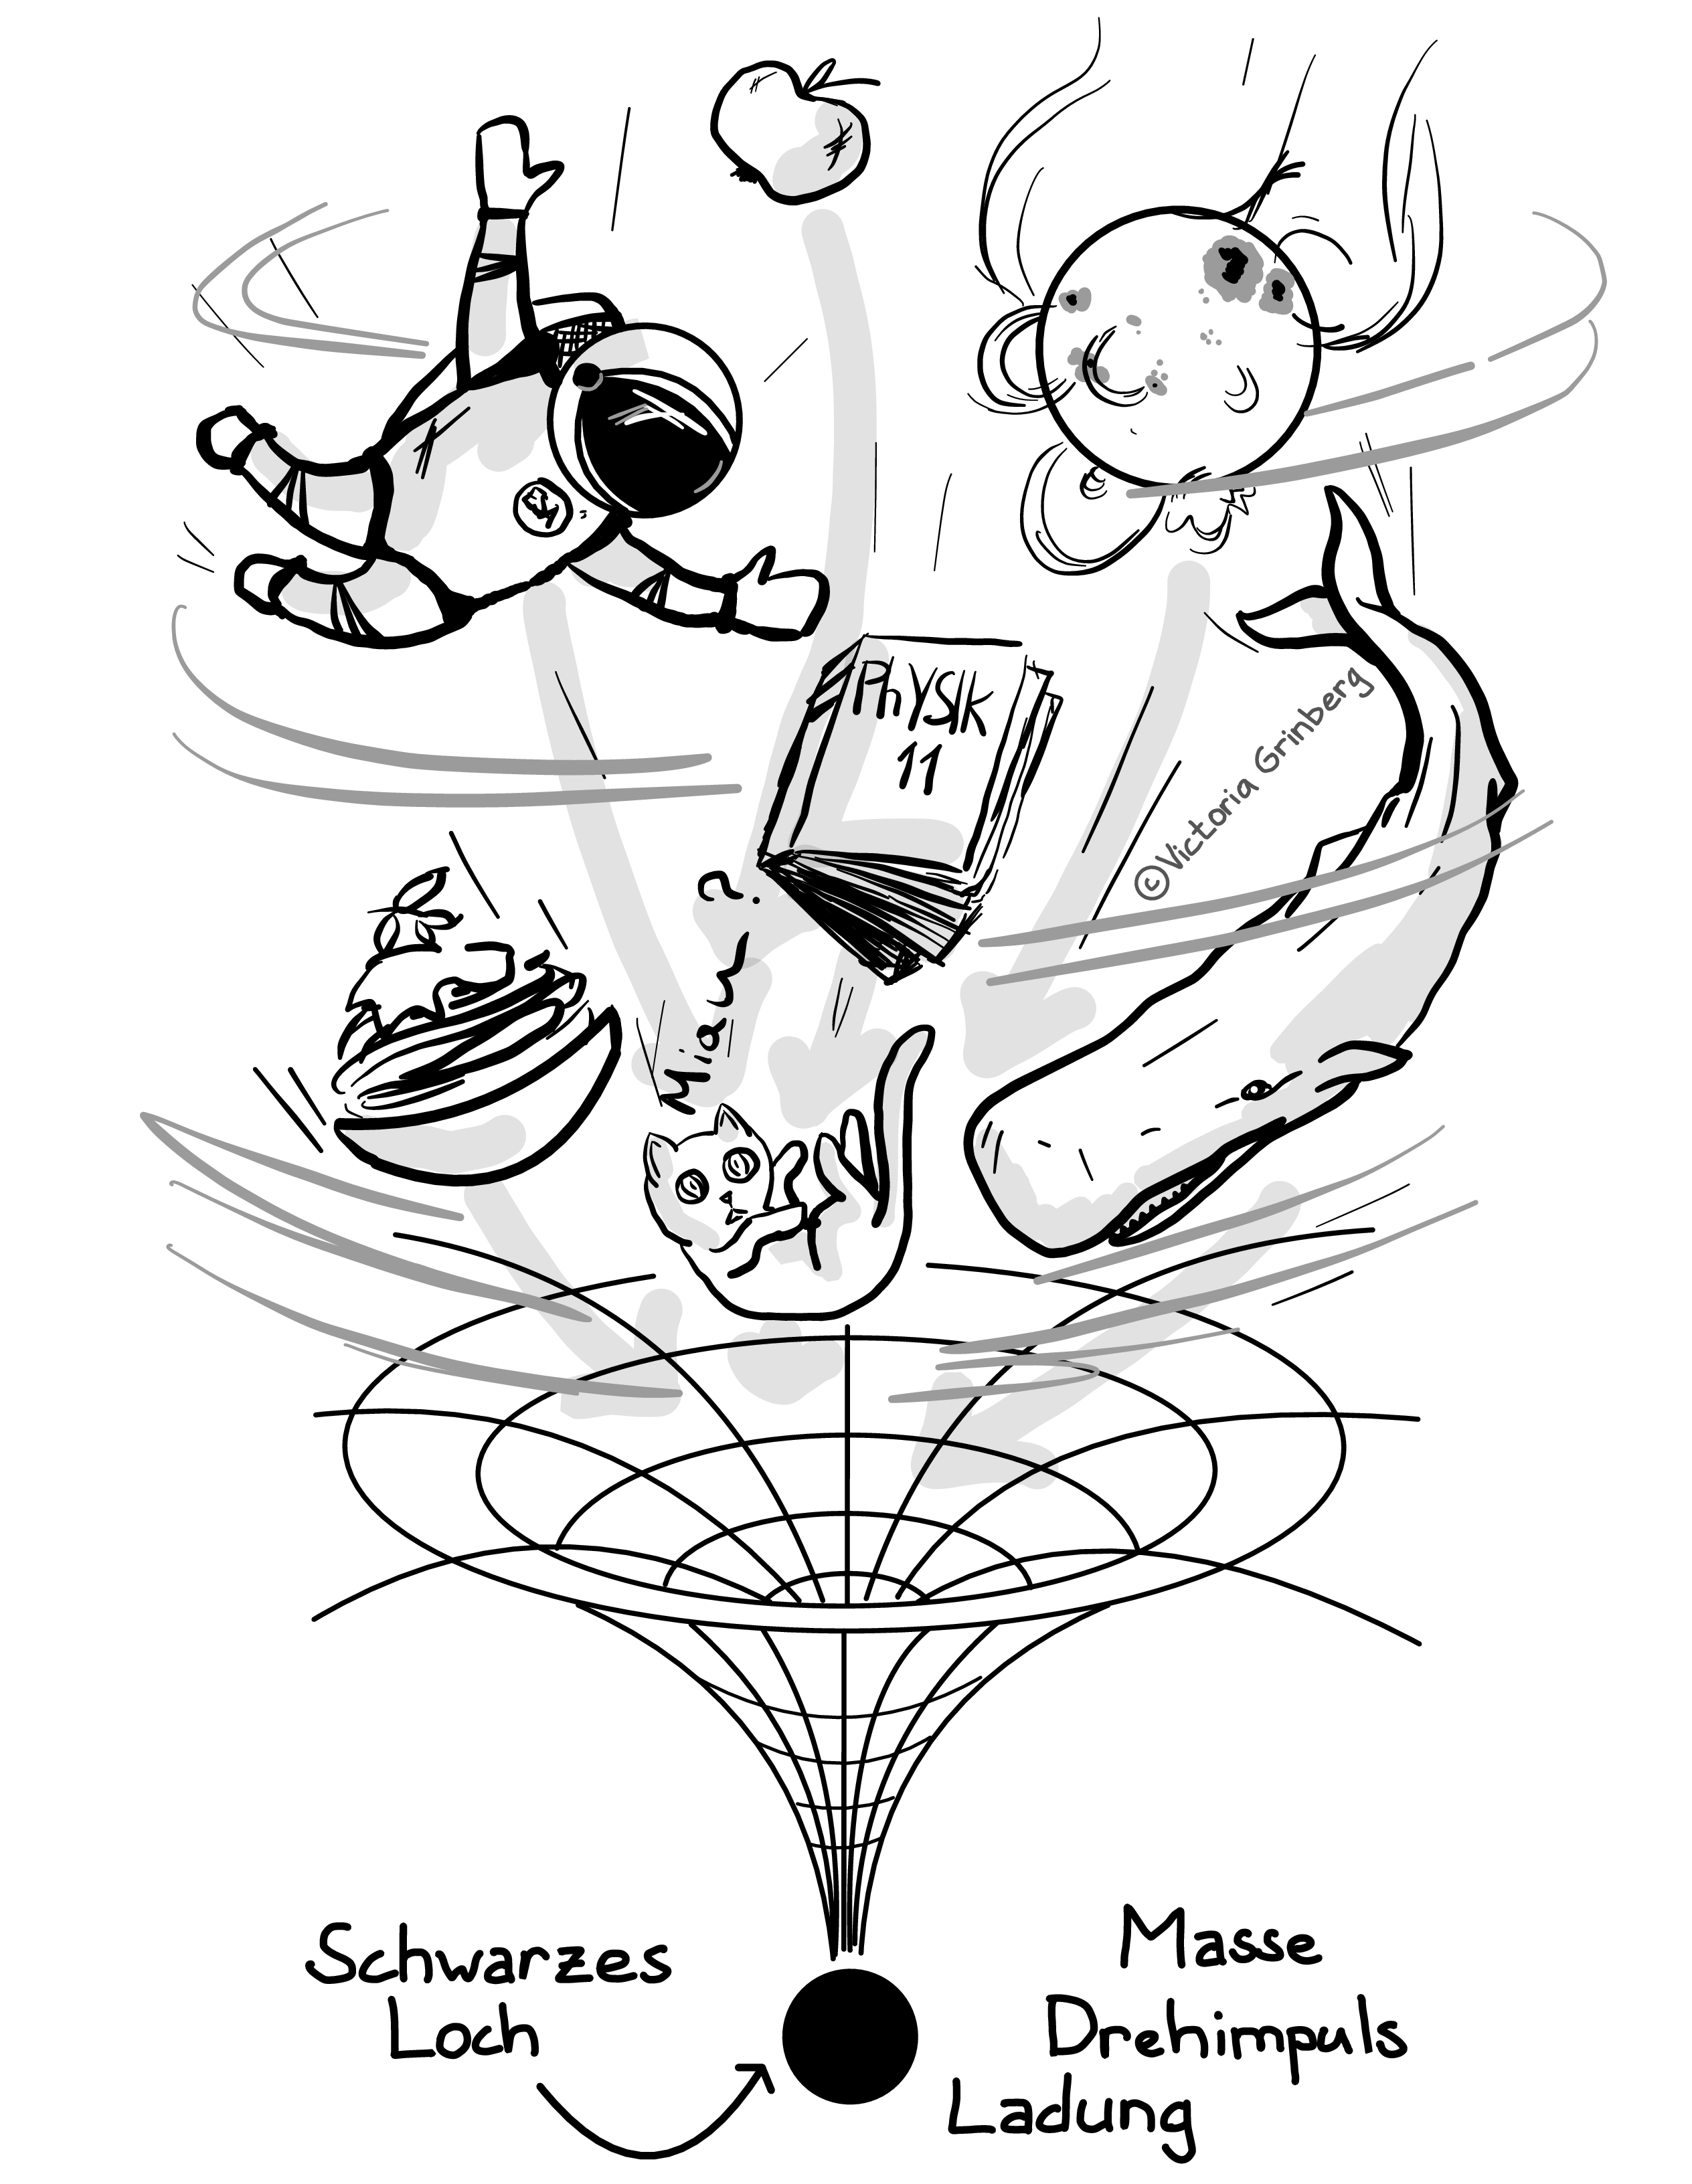 A black & white stylized sketch of things falling into a black hole: a cat, a whale, a star, an apple, a physics book, a bowl of pasta, an astronaut ... And the final black hole only has mass, angular momentum and charge (marked as words in German).